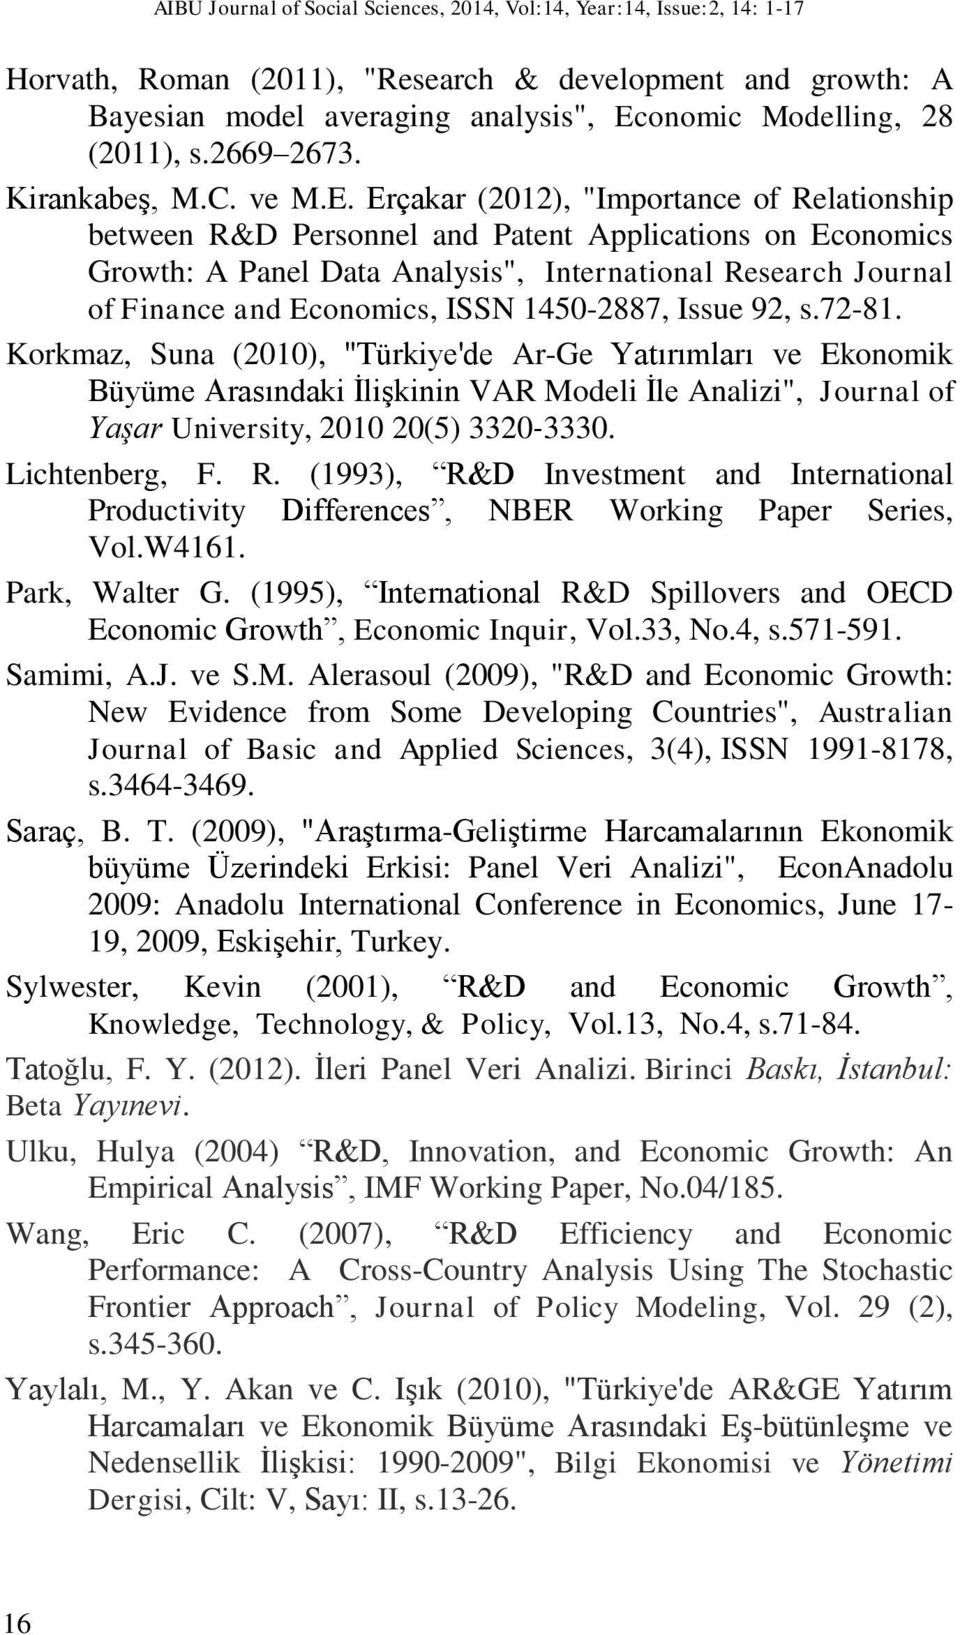 Erçakar (2012), "Importance of Relationship between R&D Personnel and Patent Applications on Economics Growth: A Panel Data Analysis", International Research Journal of Finance and Economics, ISSN